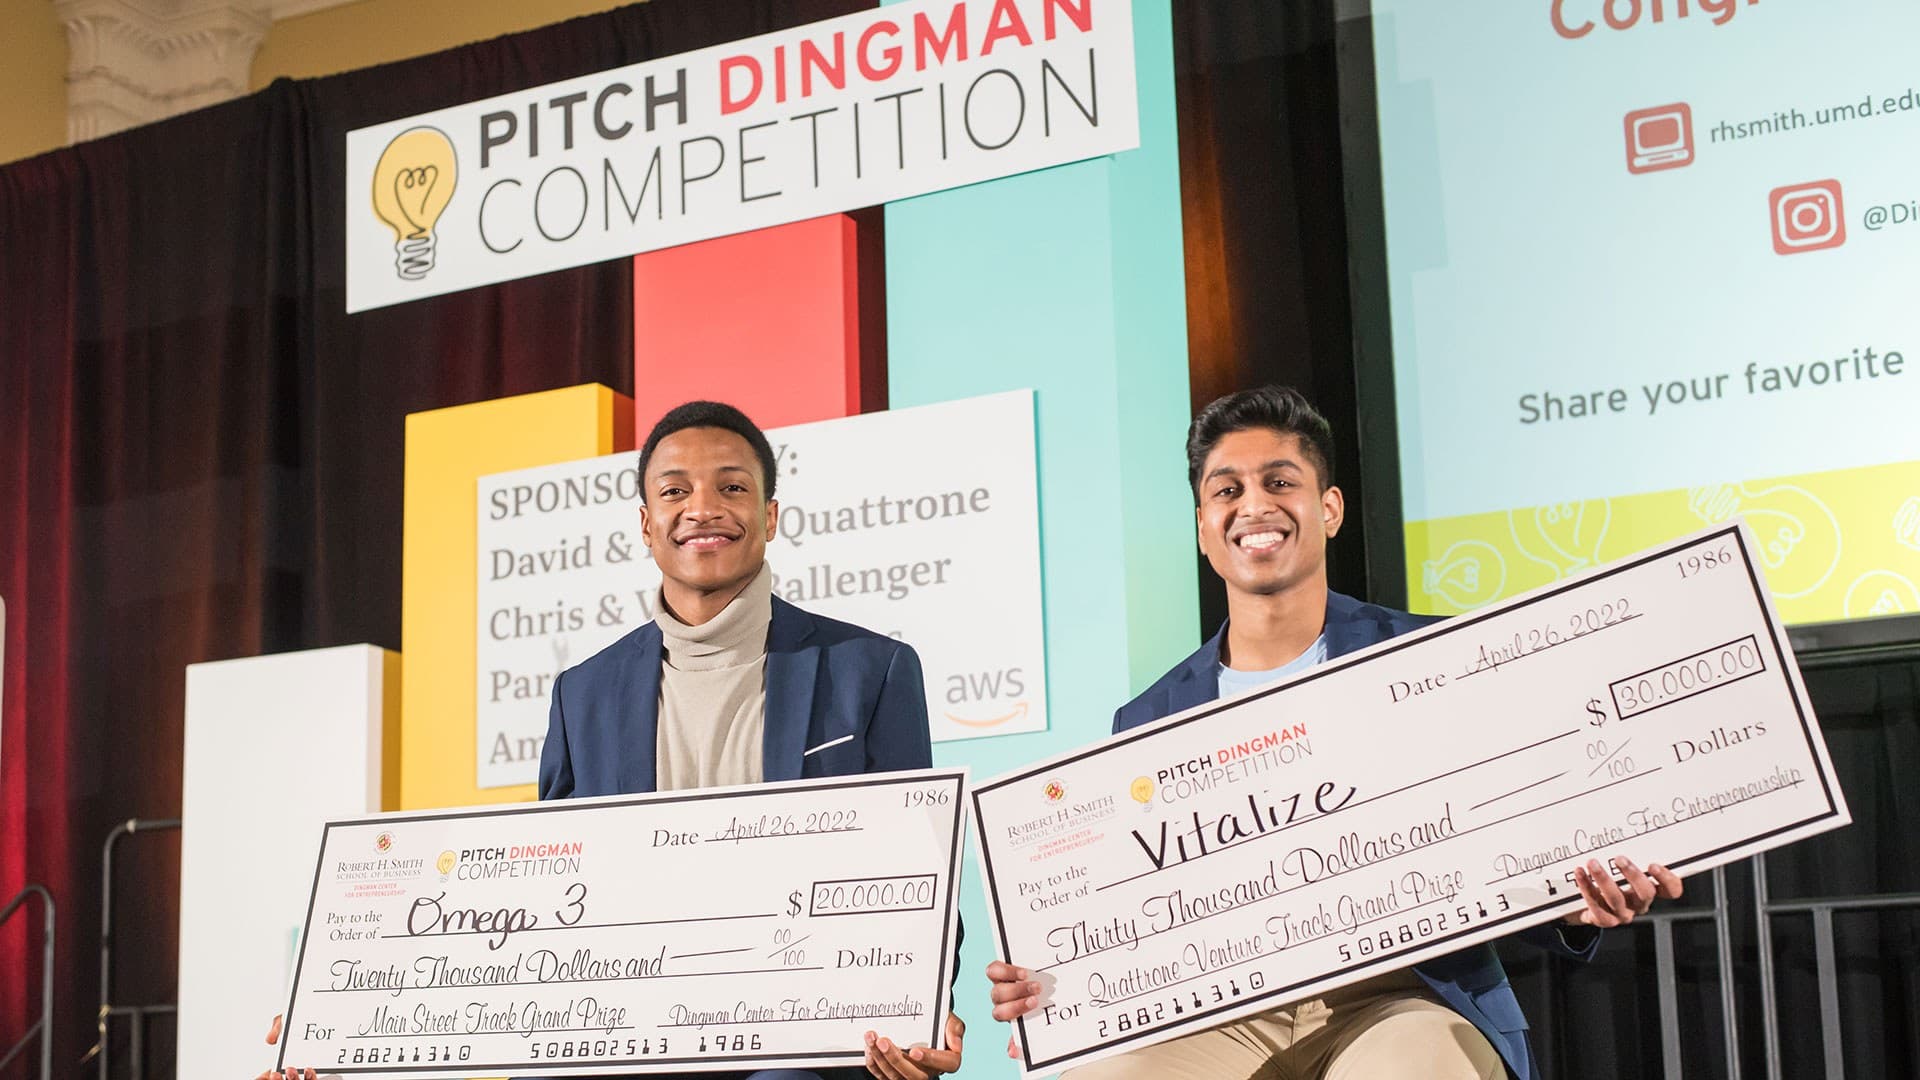 Pitch Dingman Competition winners